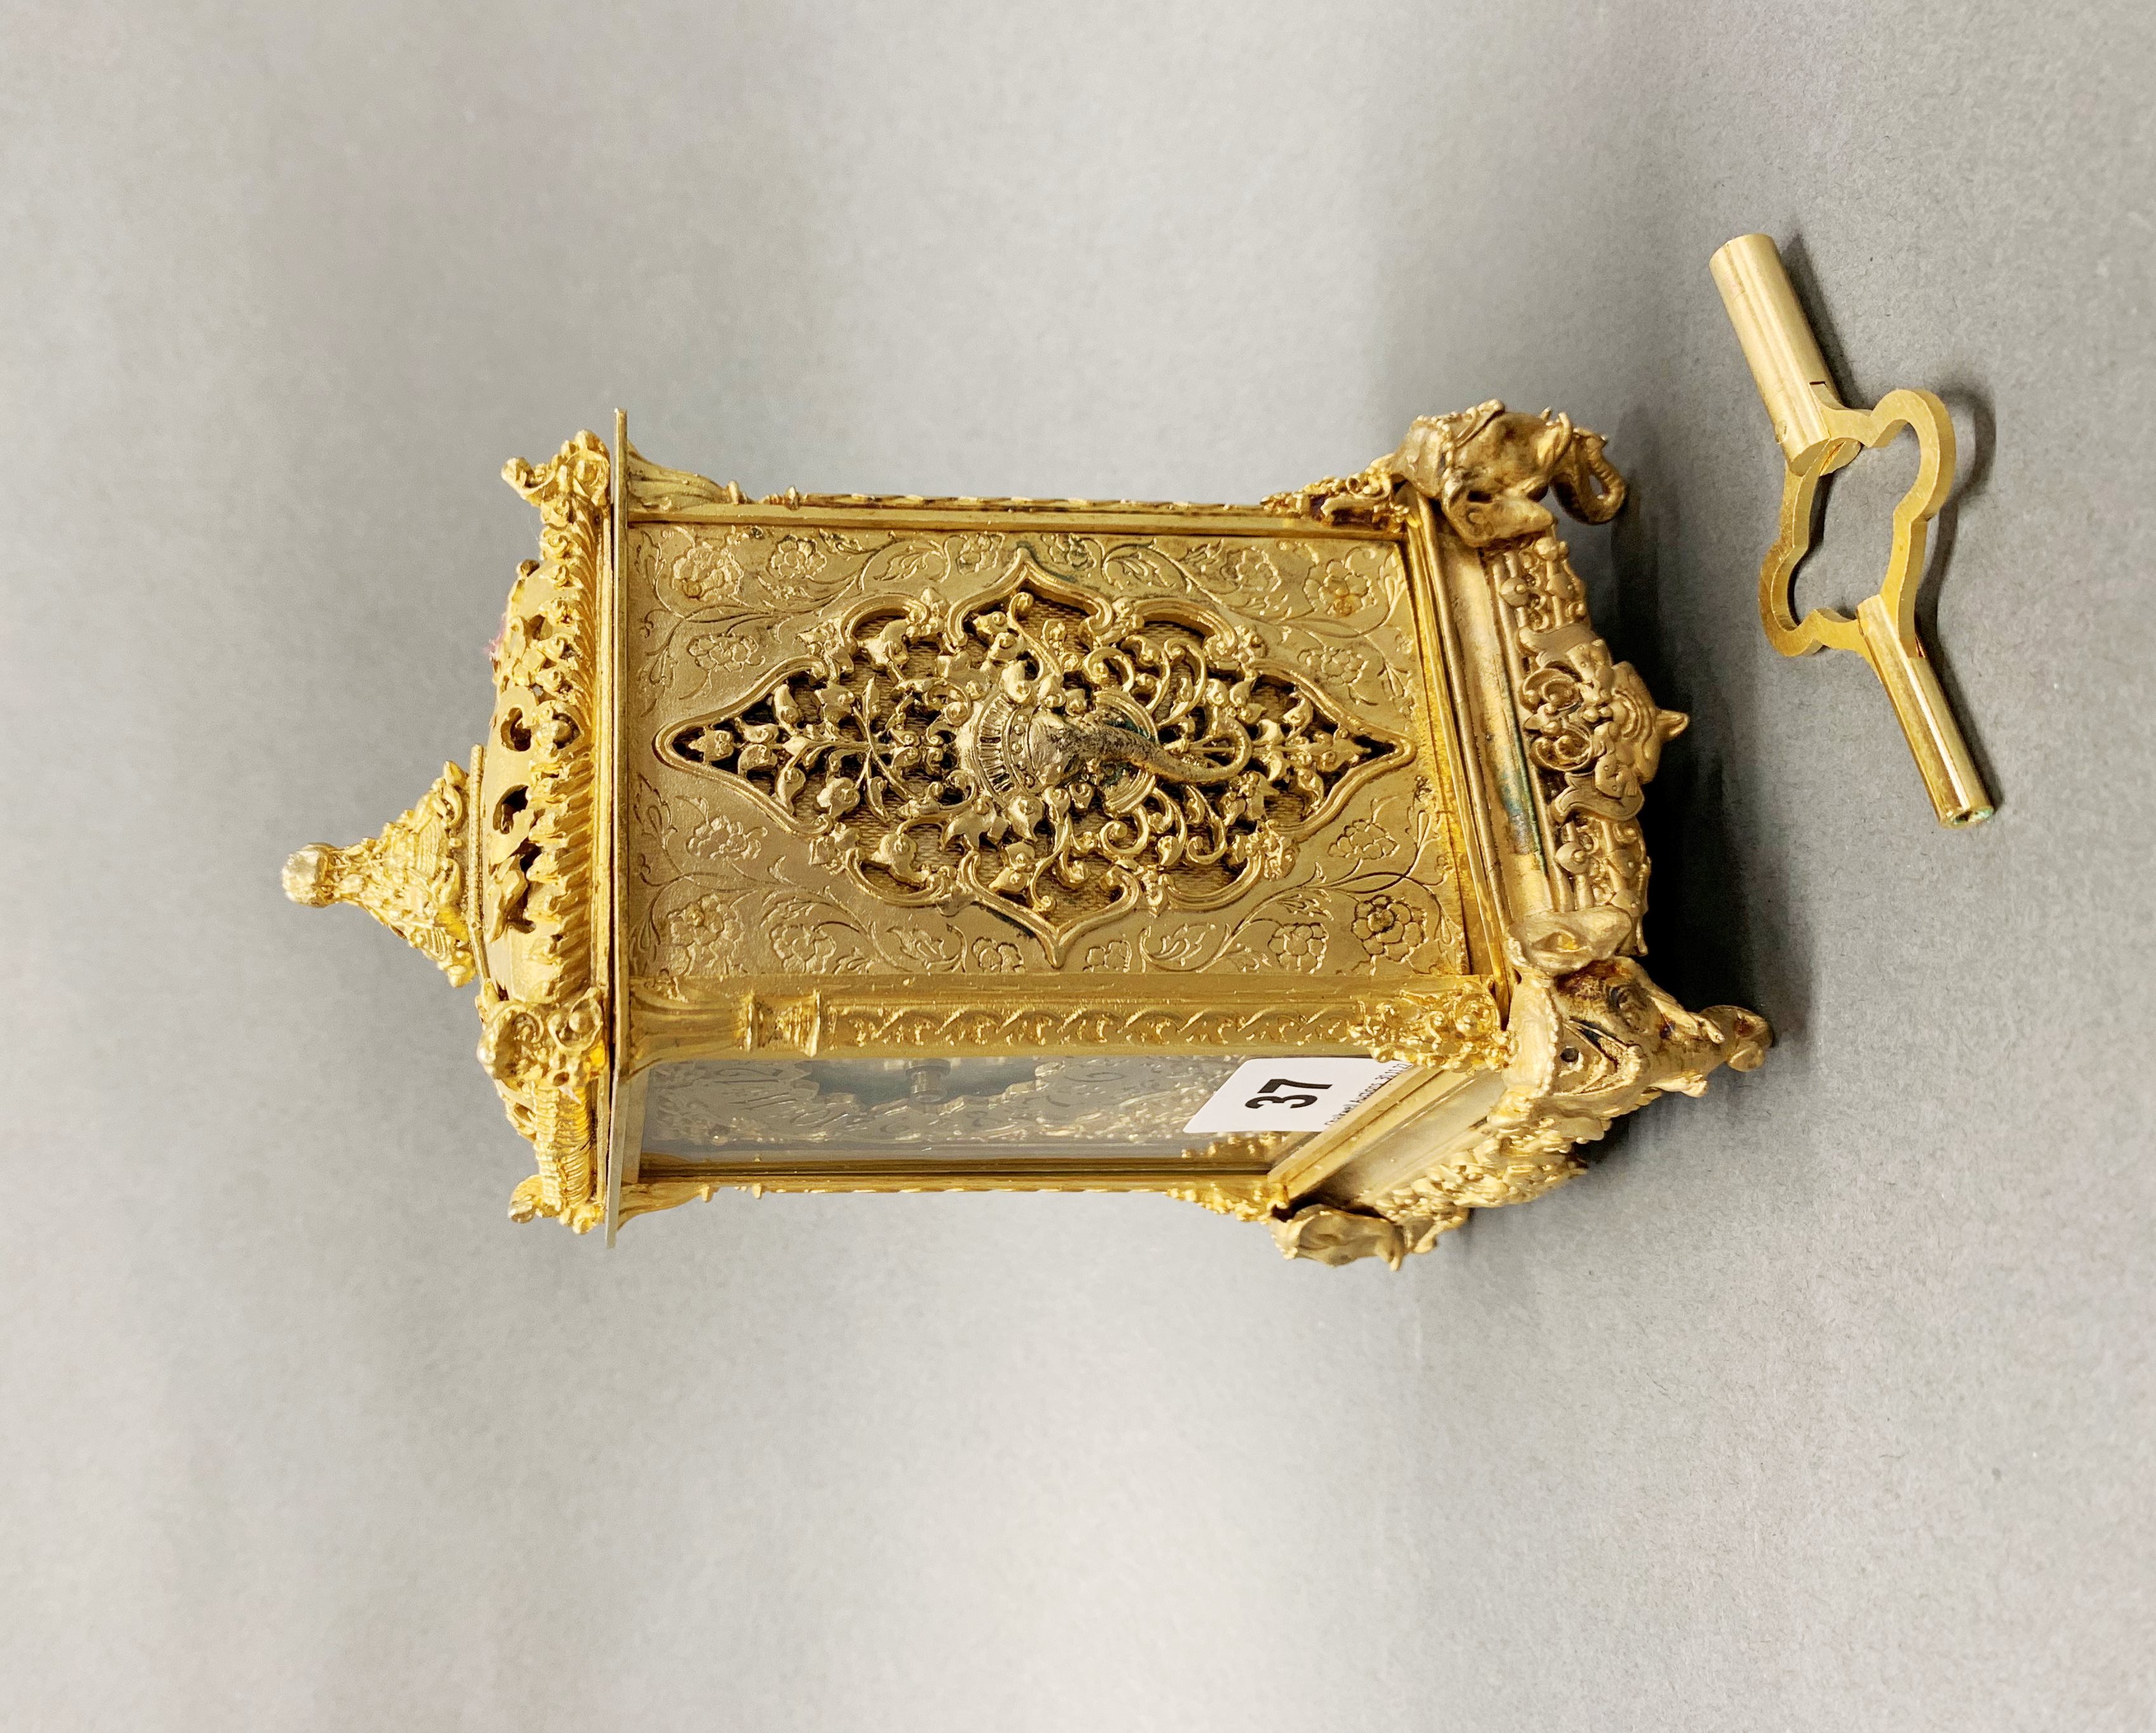 A lovely gilt bronze and mother of pearl dial mantel clock, with elephant head decoration, H. 18cm. - Image 2 of 3